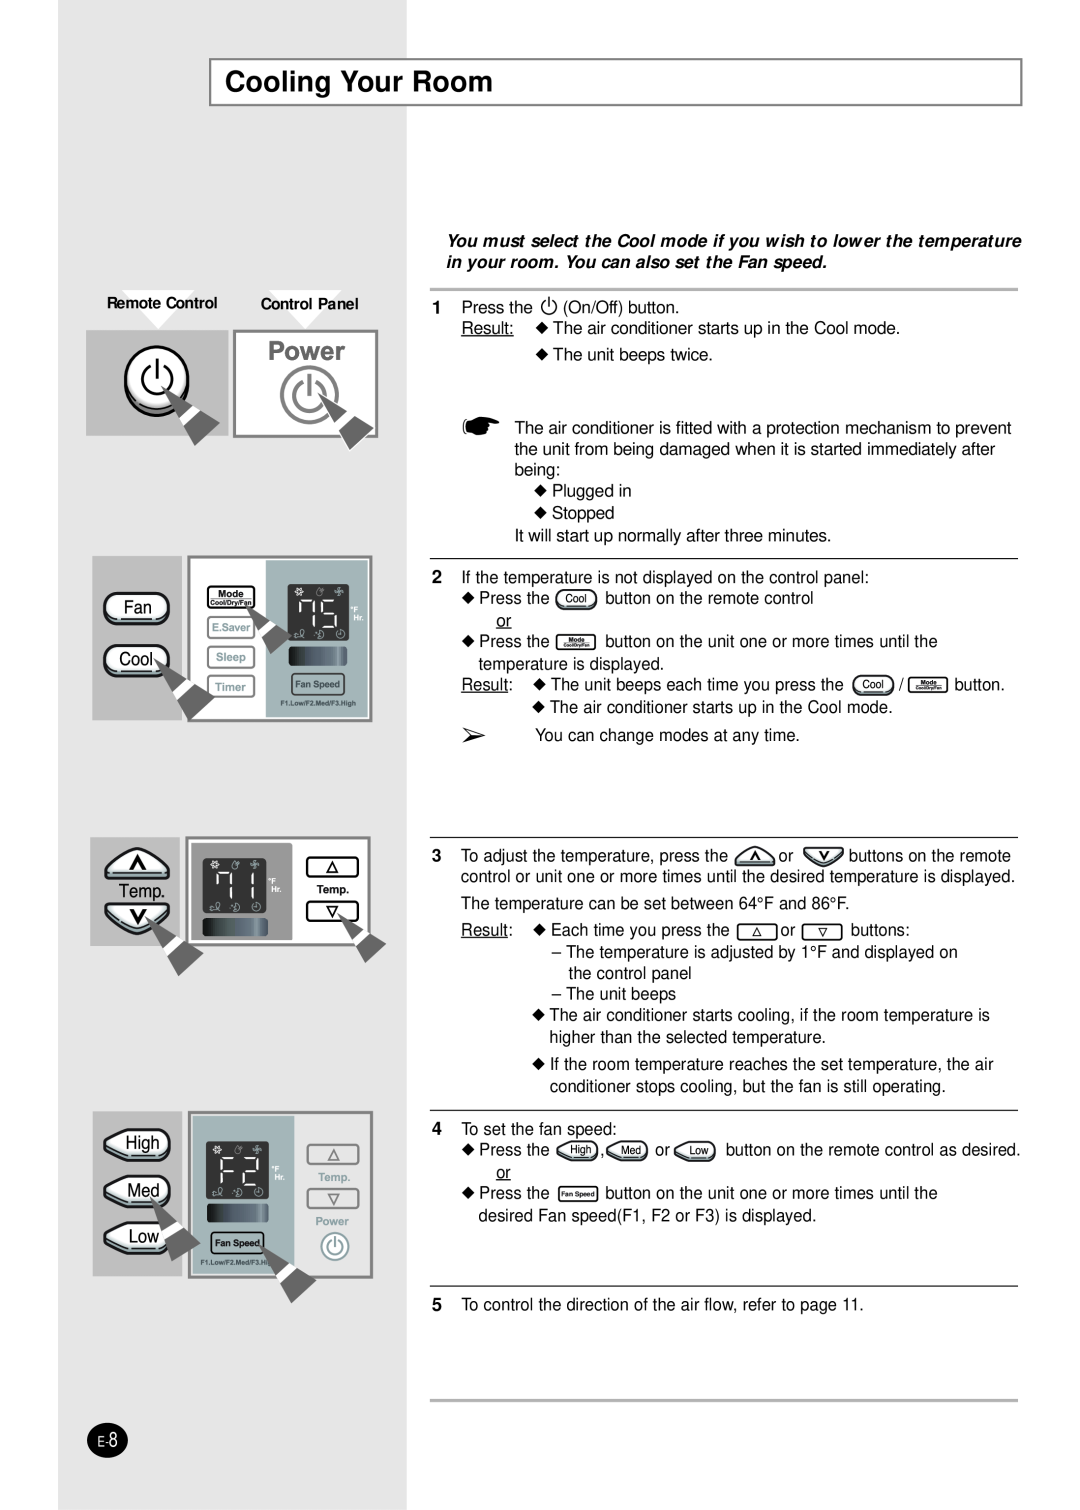 Samsung manual Cooling Your Room, Control Panel 